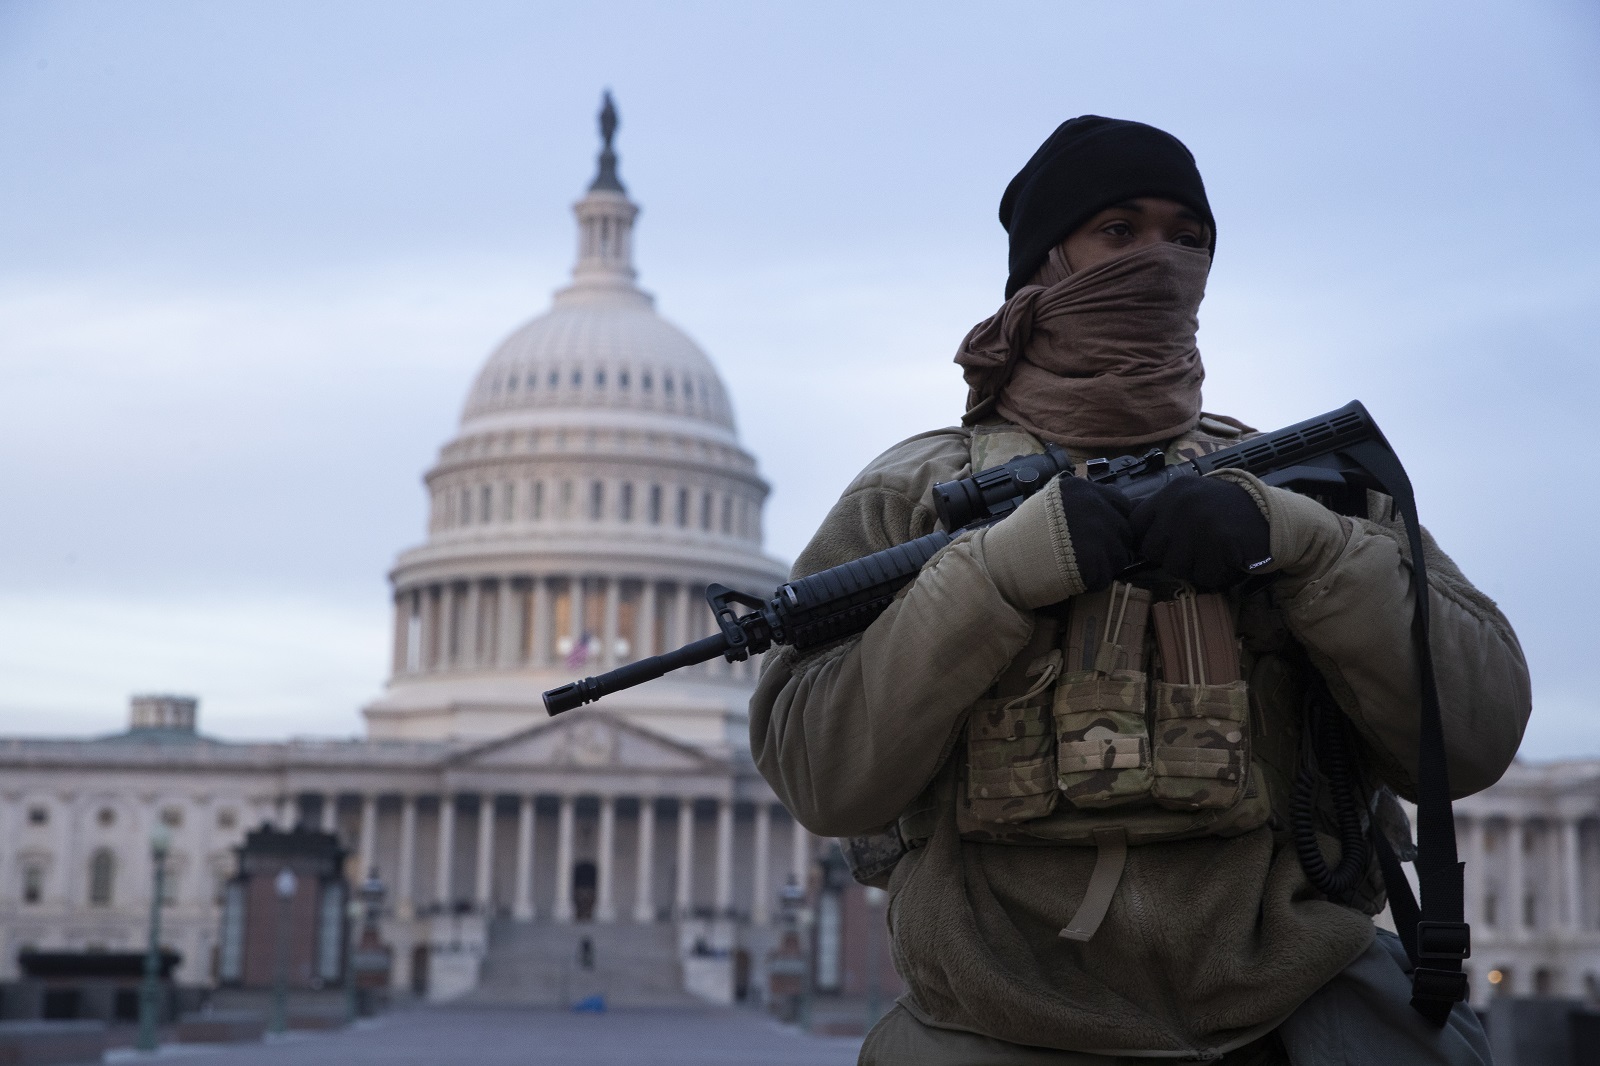 epa08939373 A member of the US National Guard stands on the East Front of the US Capitol in Washington, DC, USA, 15 January 2021. Intense security measures and a massive force of up to twenty thousand troops of the National Guard will be deployed in Washington to help secure the Capitol area after a mob of Trump supporters rioted at the US Capitol on 06 January.  EPA/MICHAEL REYNOLDS